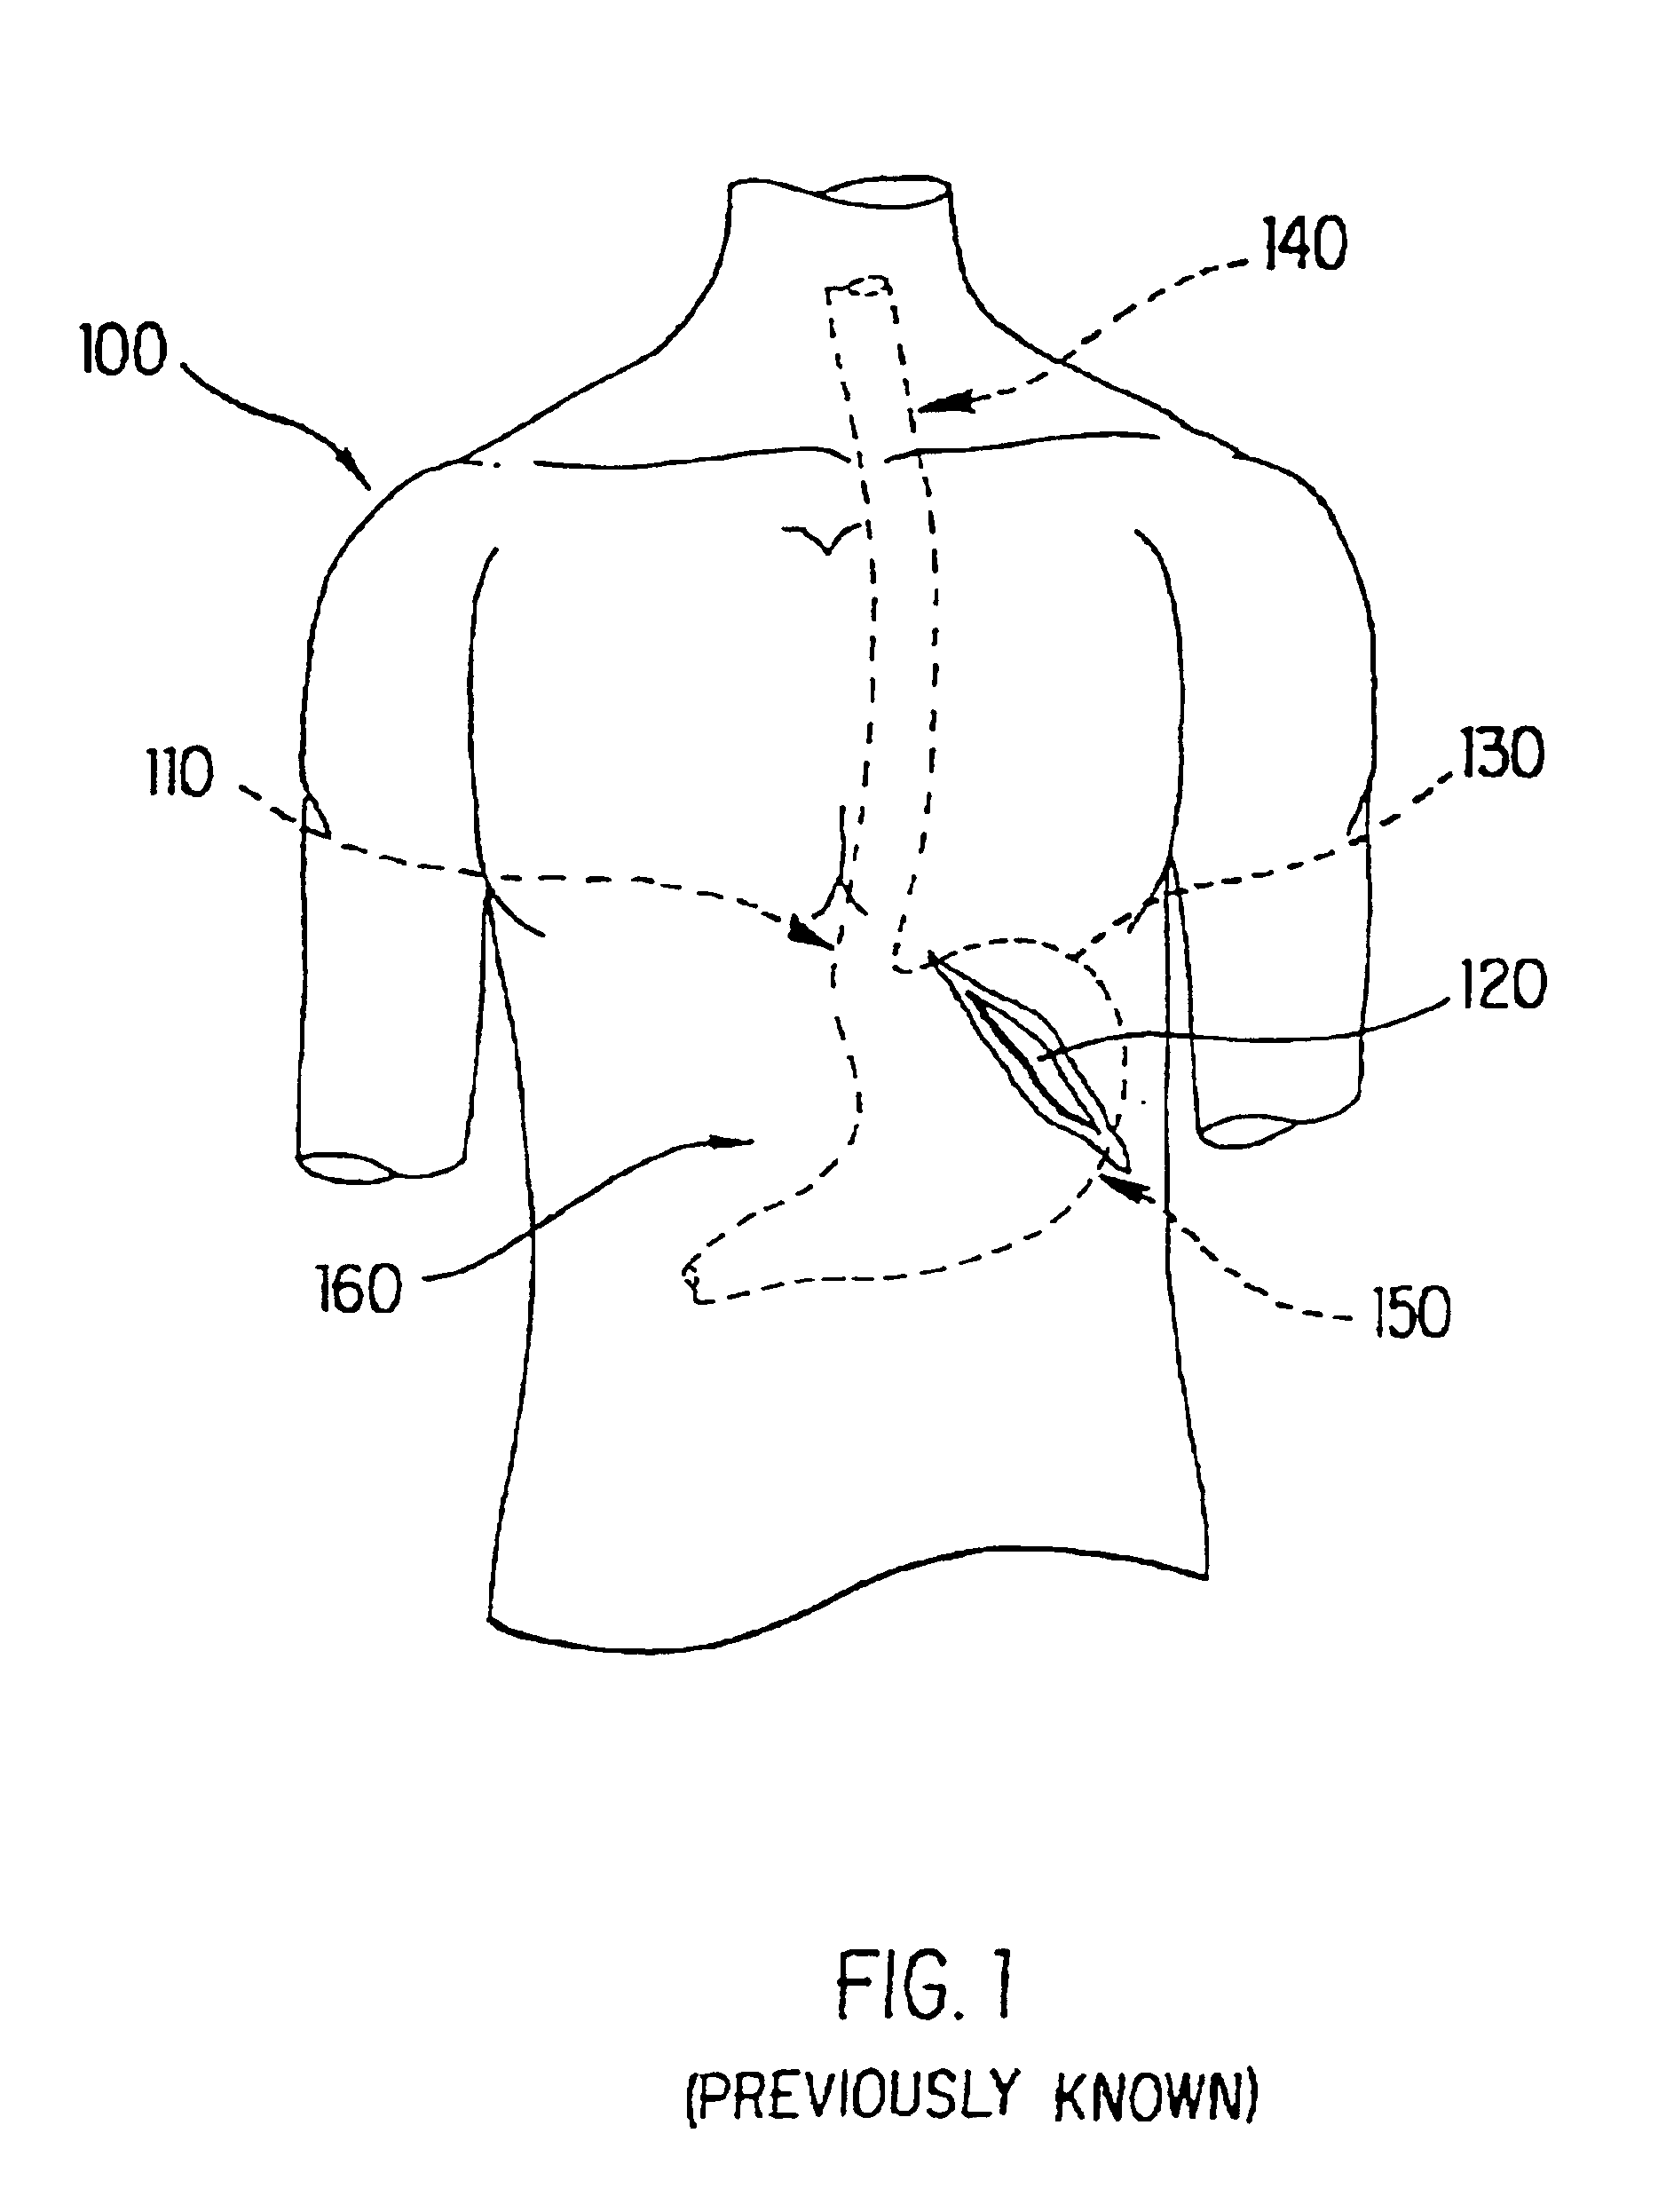 Method and apparatus for endoscopic repair of the lower esophageal sphincter